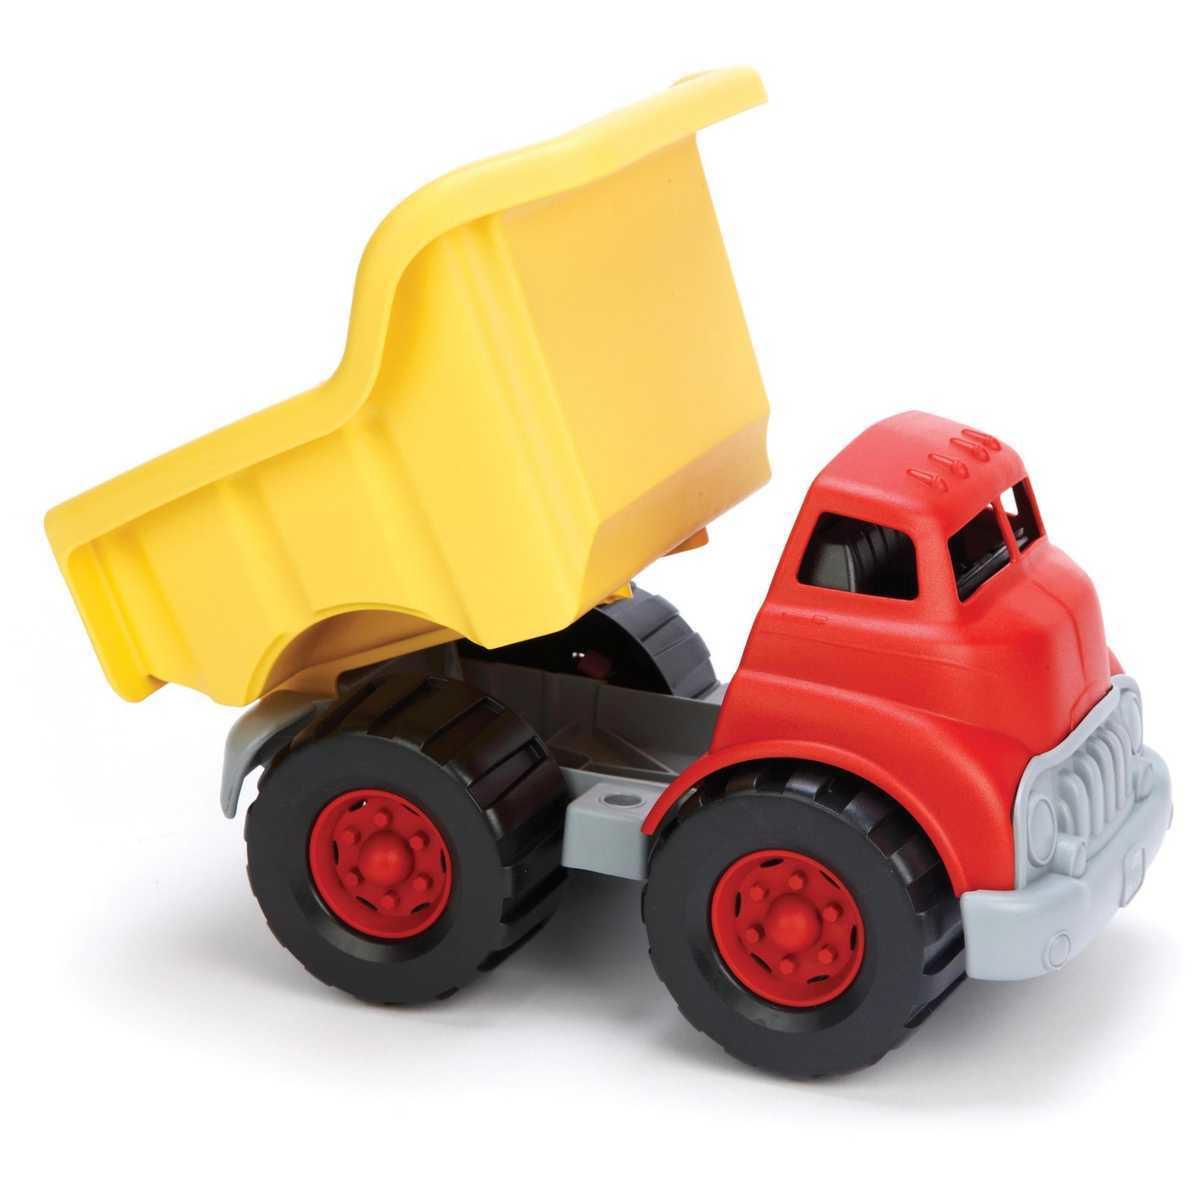 Green Toys Eco Friendly Dump Truck made from recycled plastic